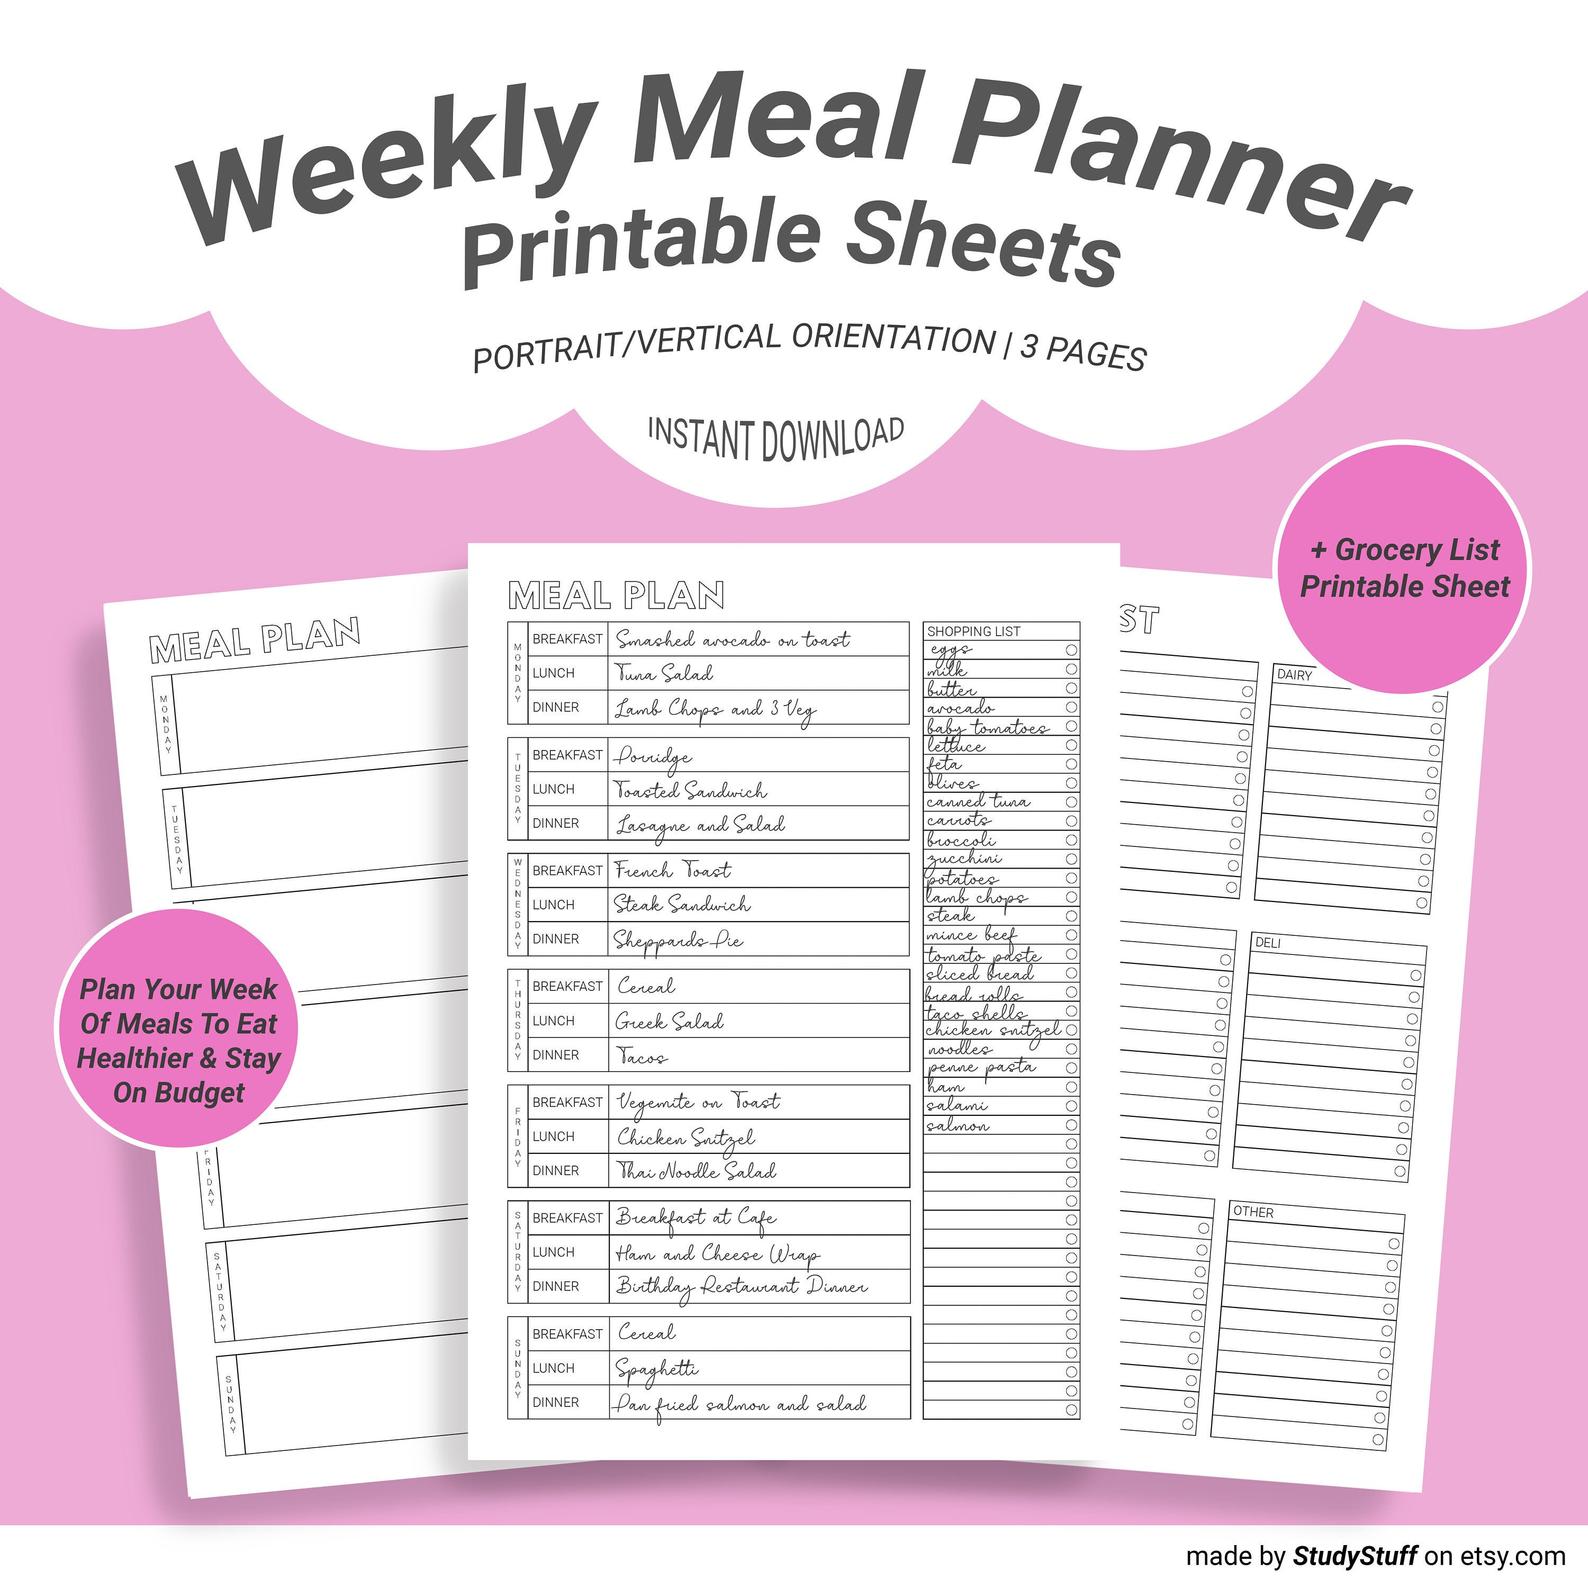 How To Create A Great Meal Plan As A Student - Study-Stuff